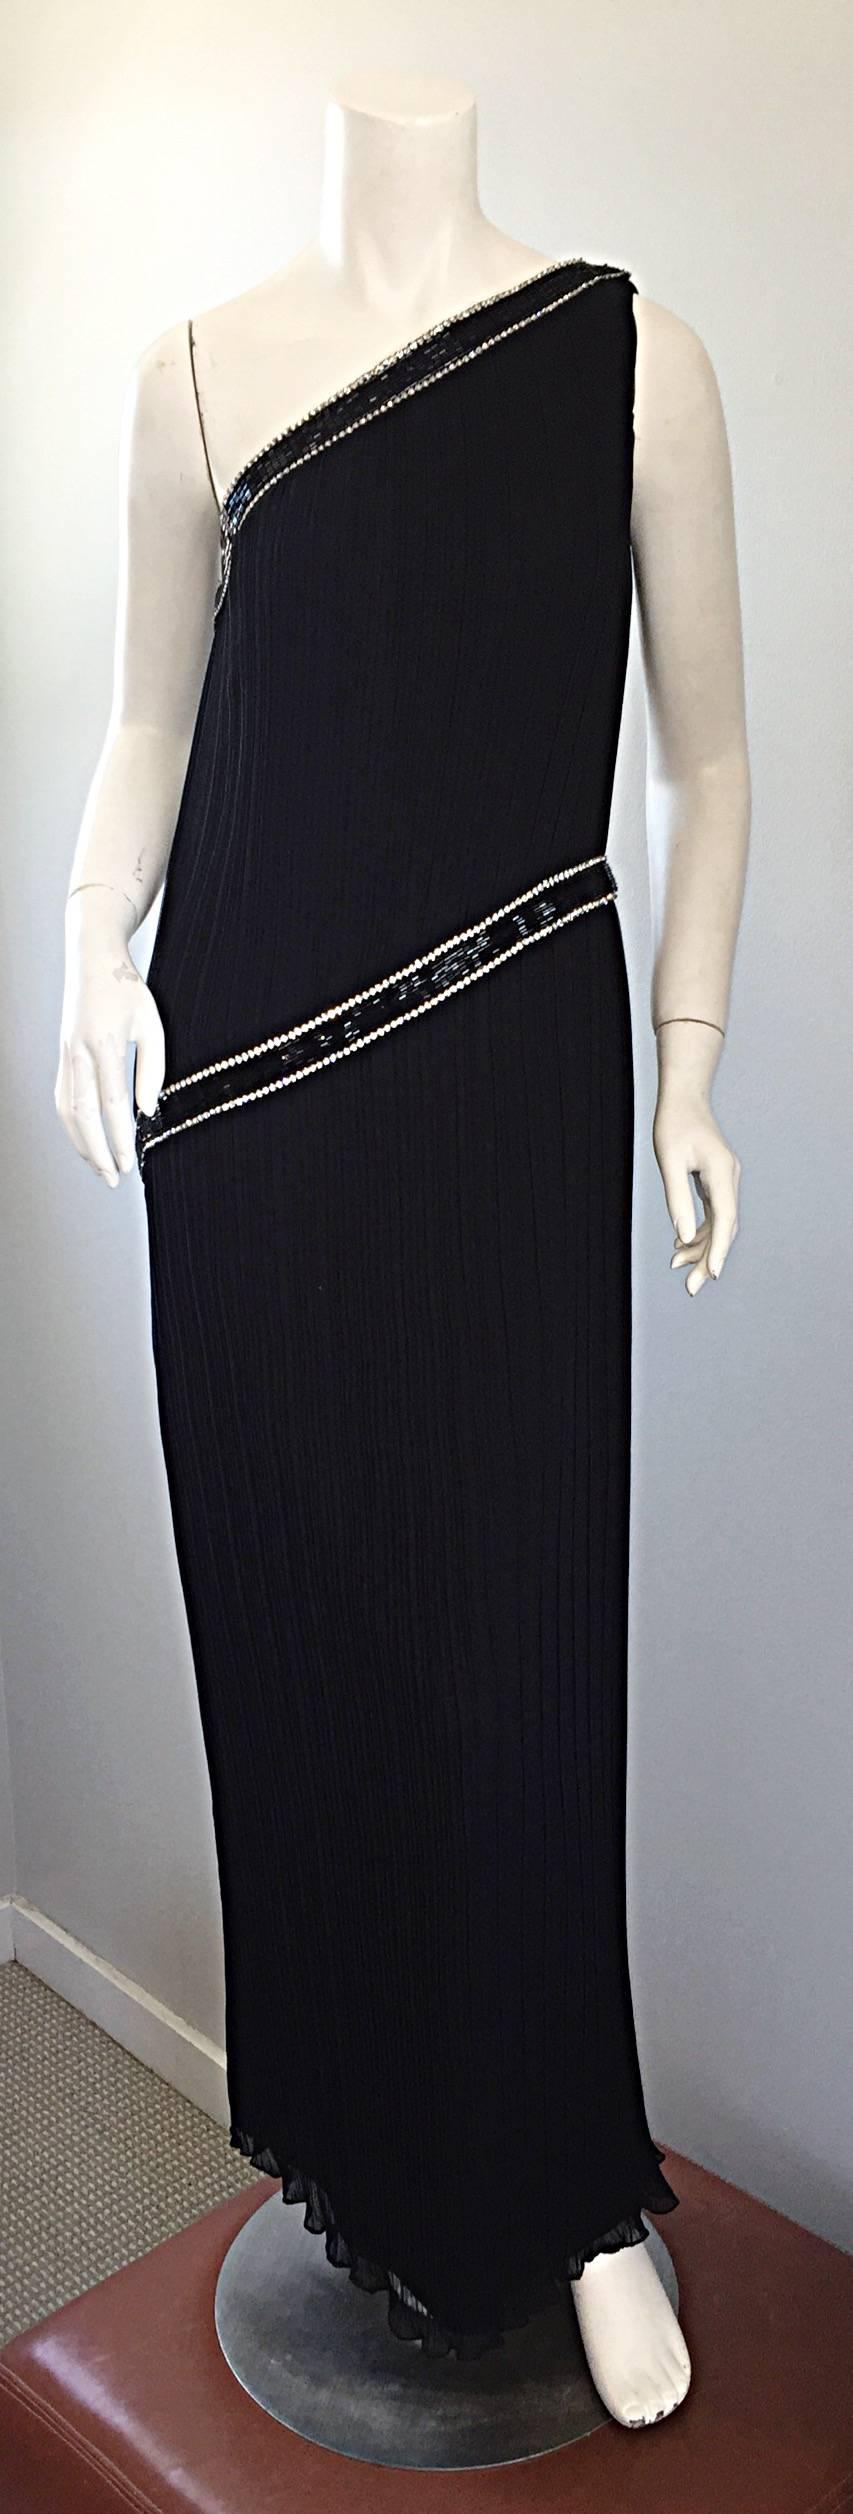 Jill Richards for I. Magnin Black Silk Plisse One Shoulder Rhinestone Gown Dress In Excellent Condition For Sale In San Diego, CA